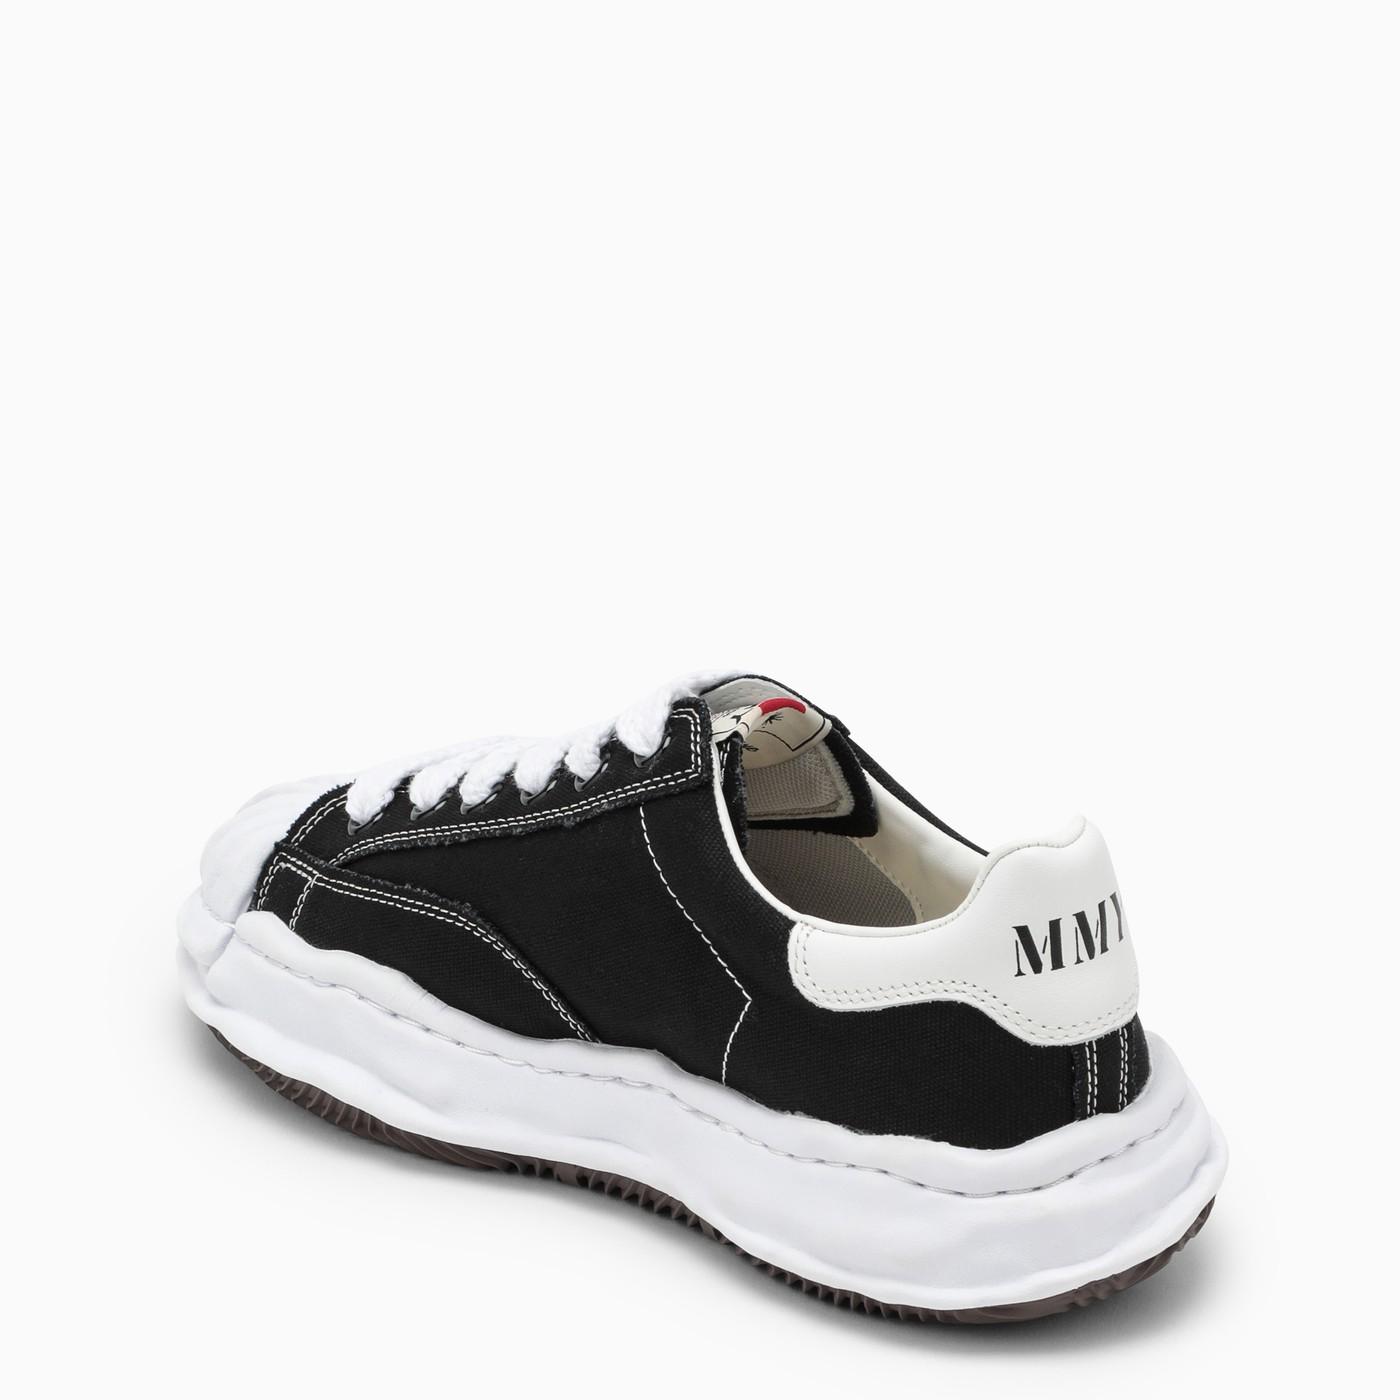 Maison Mihara Yasuhiro Canvas Blakey Low-top Sneakers in Black for 